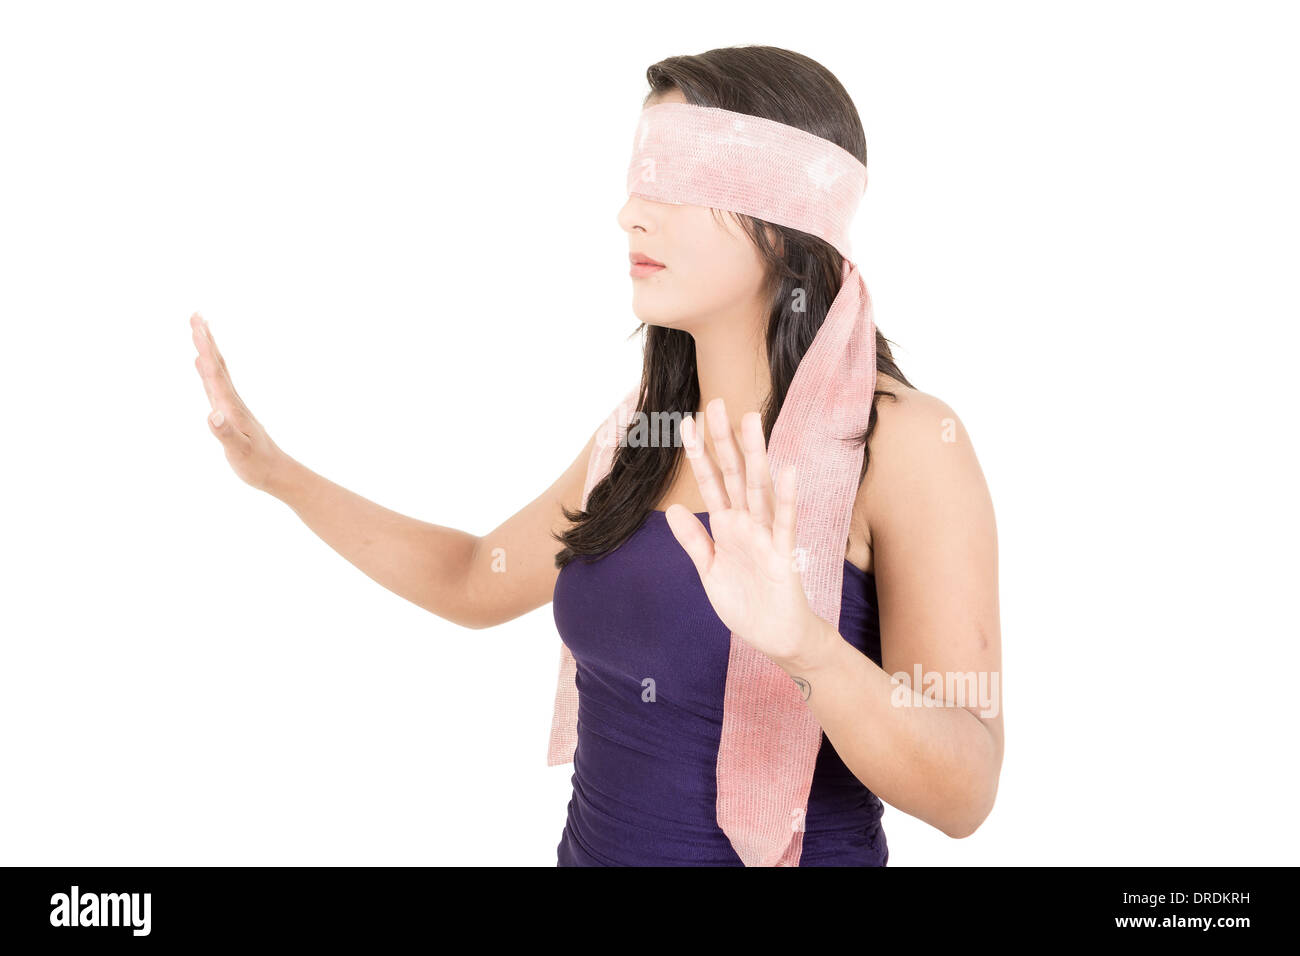 A Blindfolded Woman with Her Hands on Her Face · Free Stock Photo